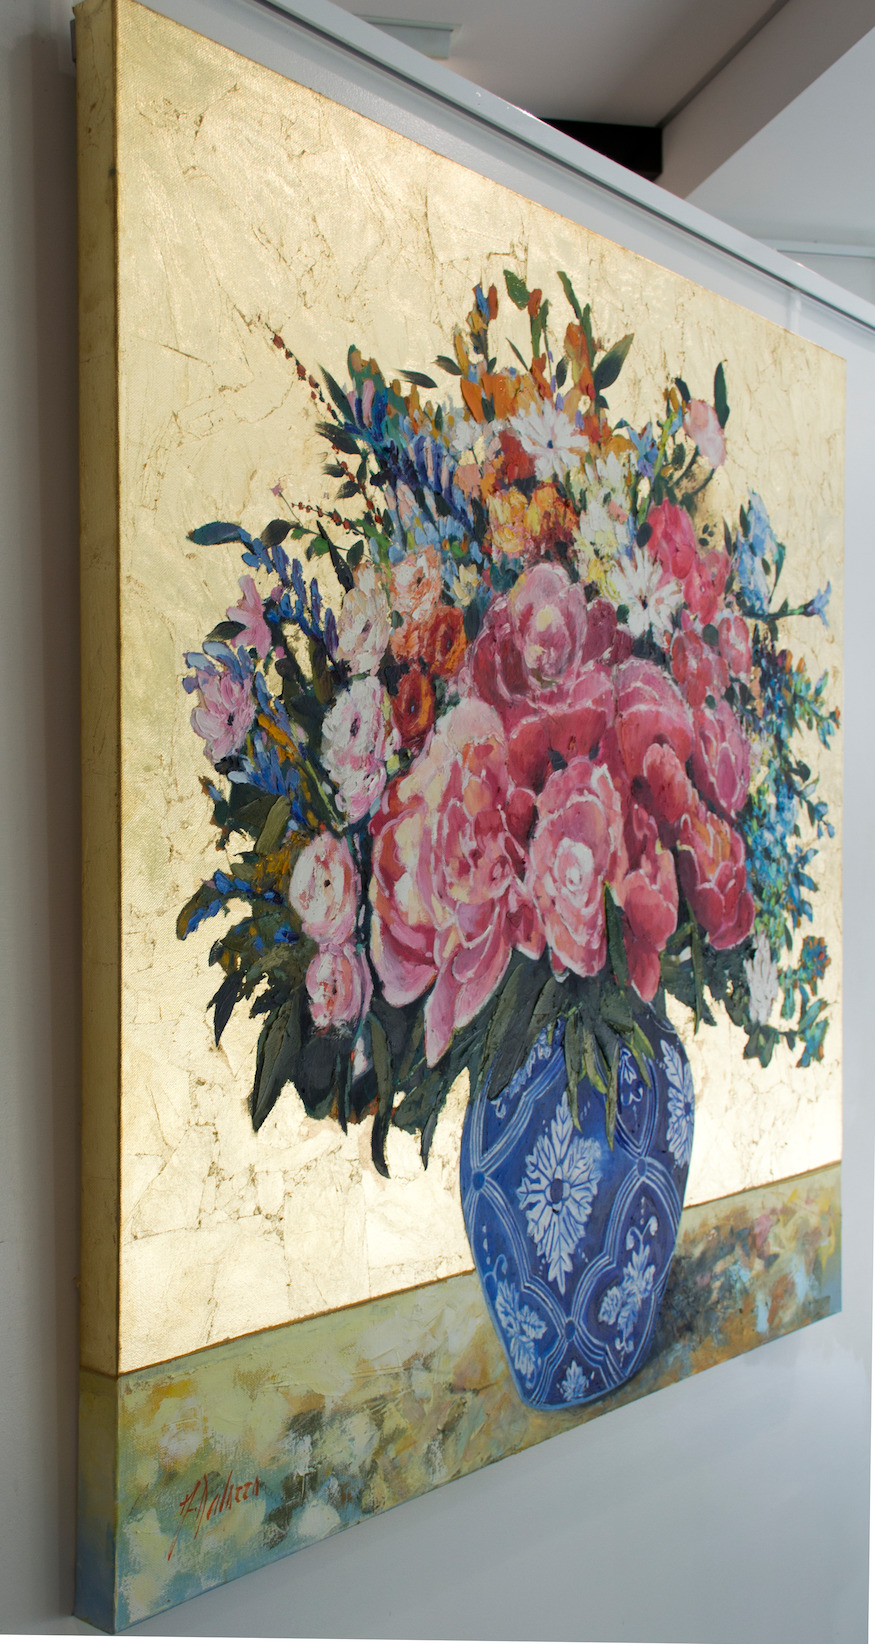 Side View Of Still Life Painting "Everlasting Peonies" By Judith Dalozzo